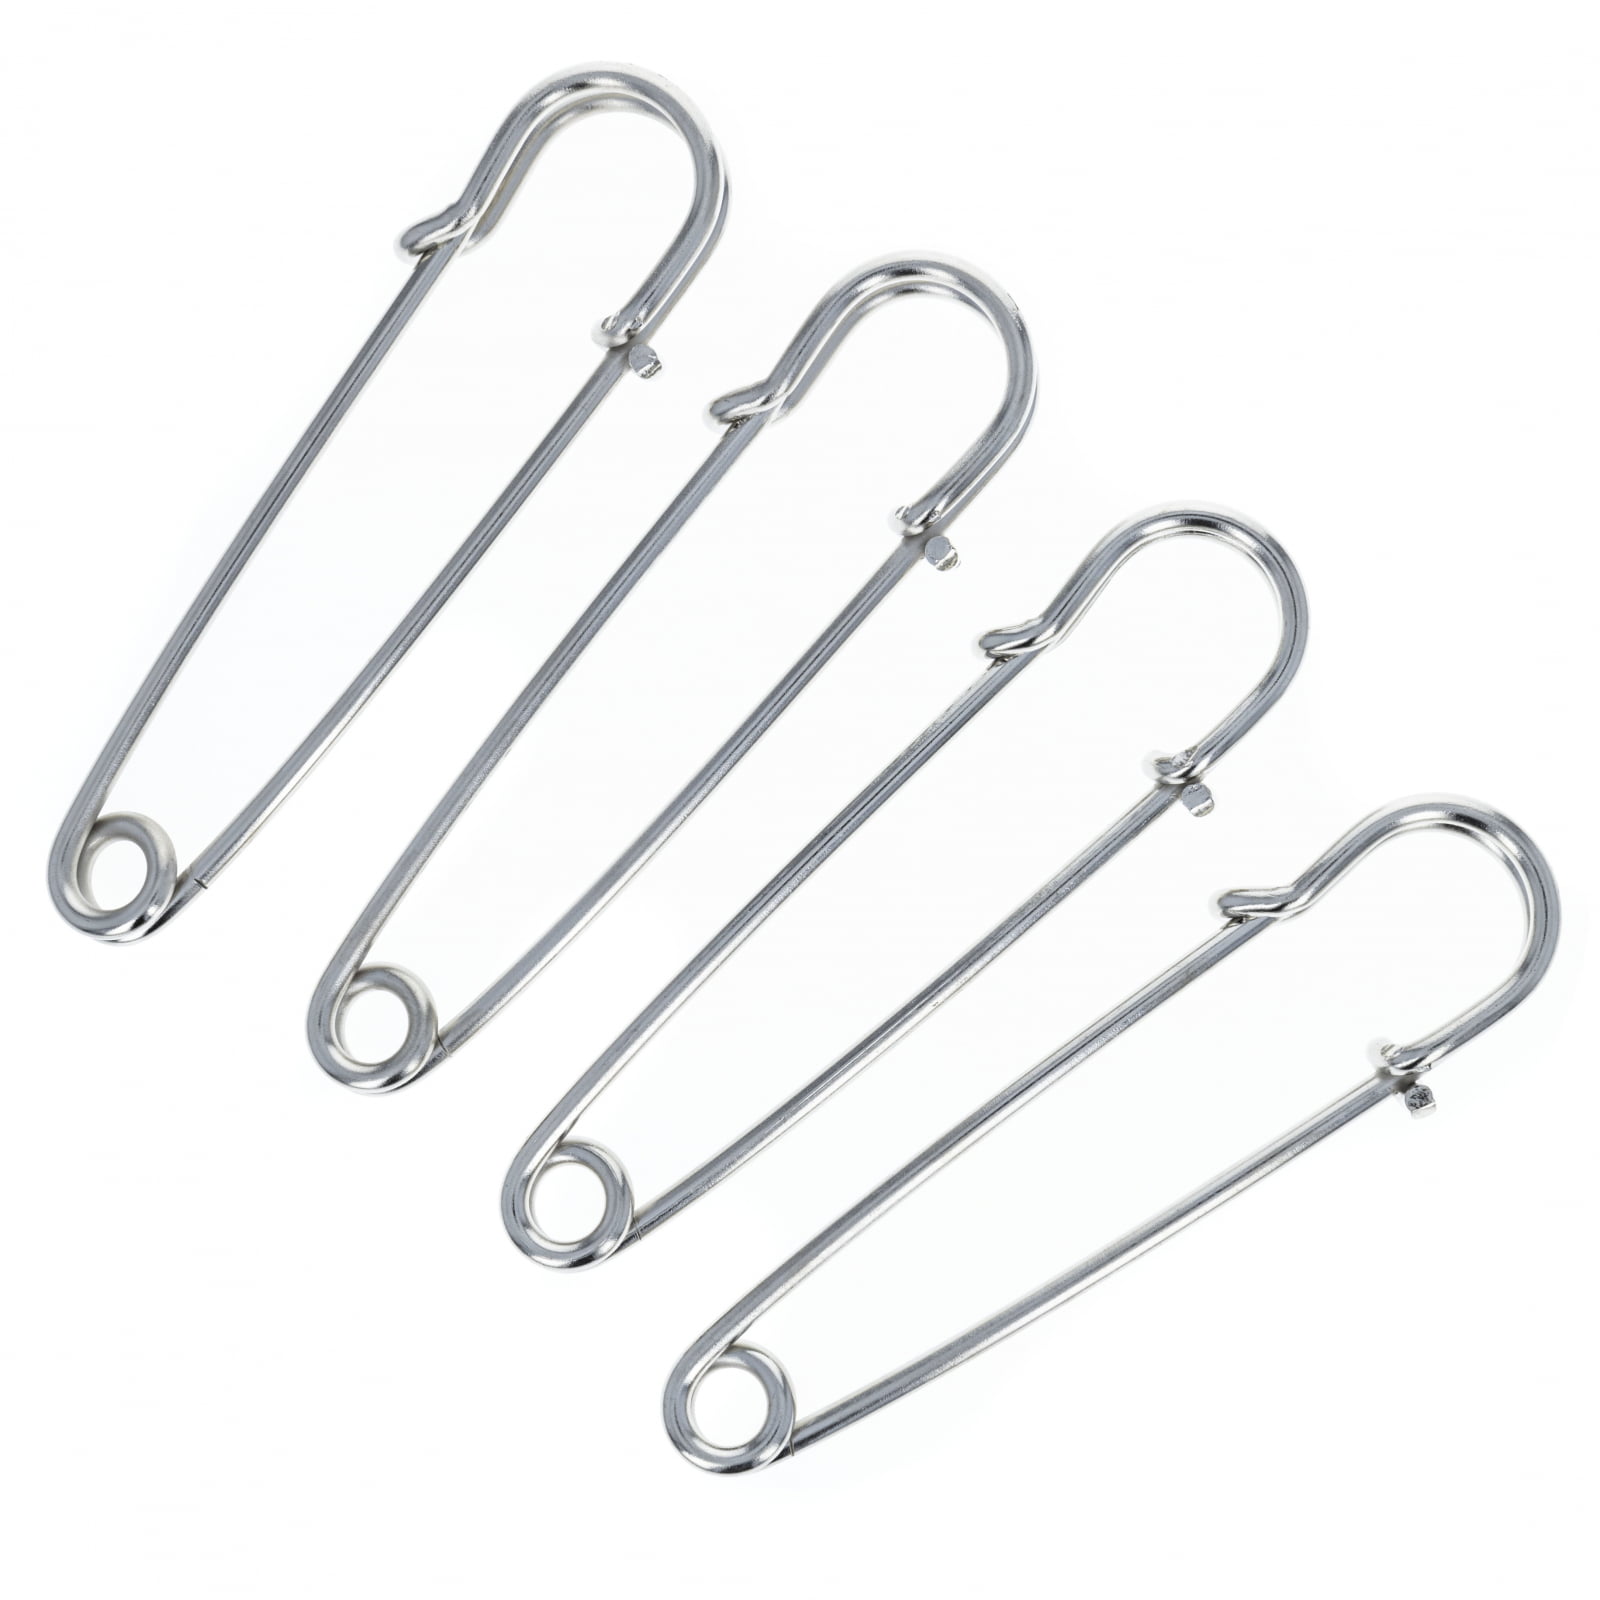 Assorted Color Baby Cloth Pins Plastic Head Stainless Steel Lock Pin for Clothes Nappy Craft Quilting Sewing 100 Pcs Diaper Safety Pins Hold Clip Small+Large 